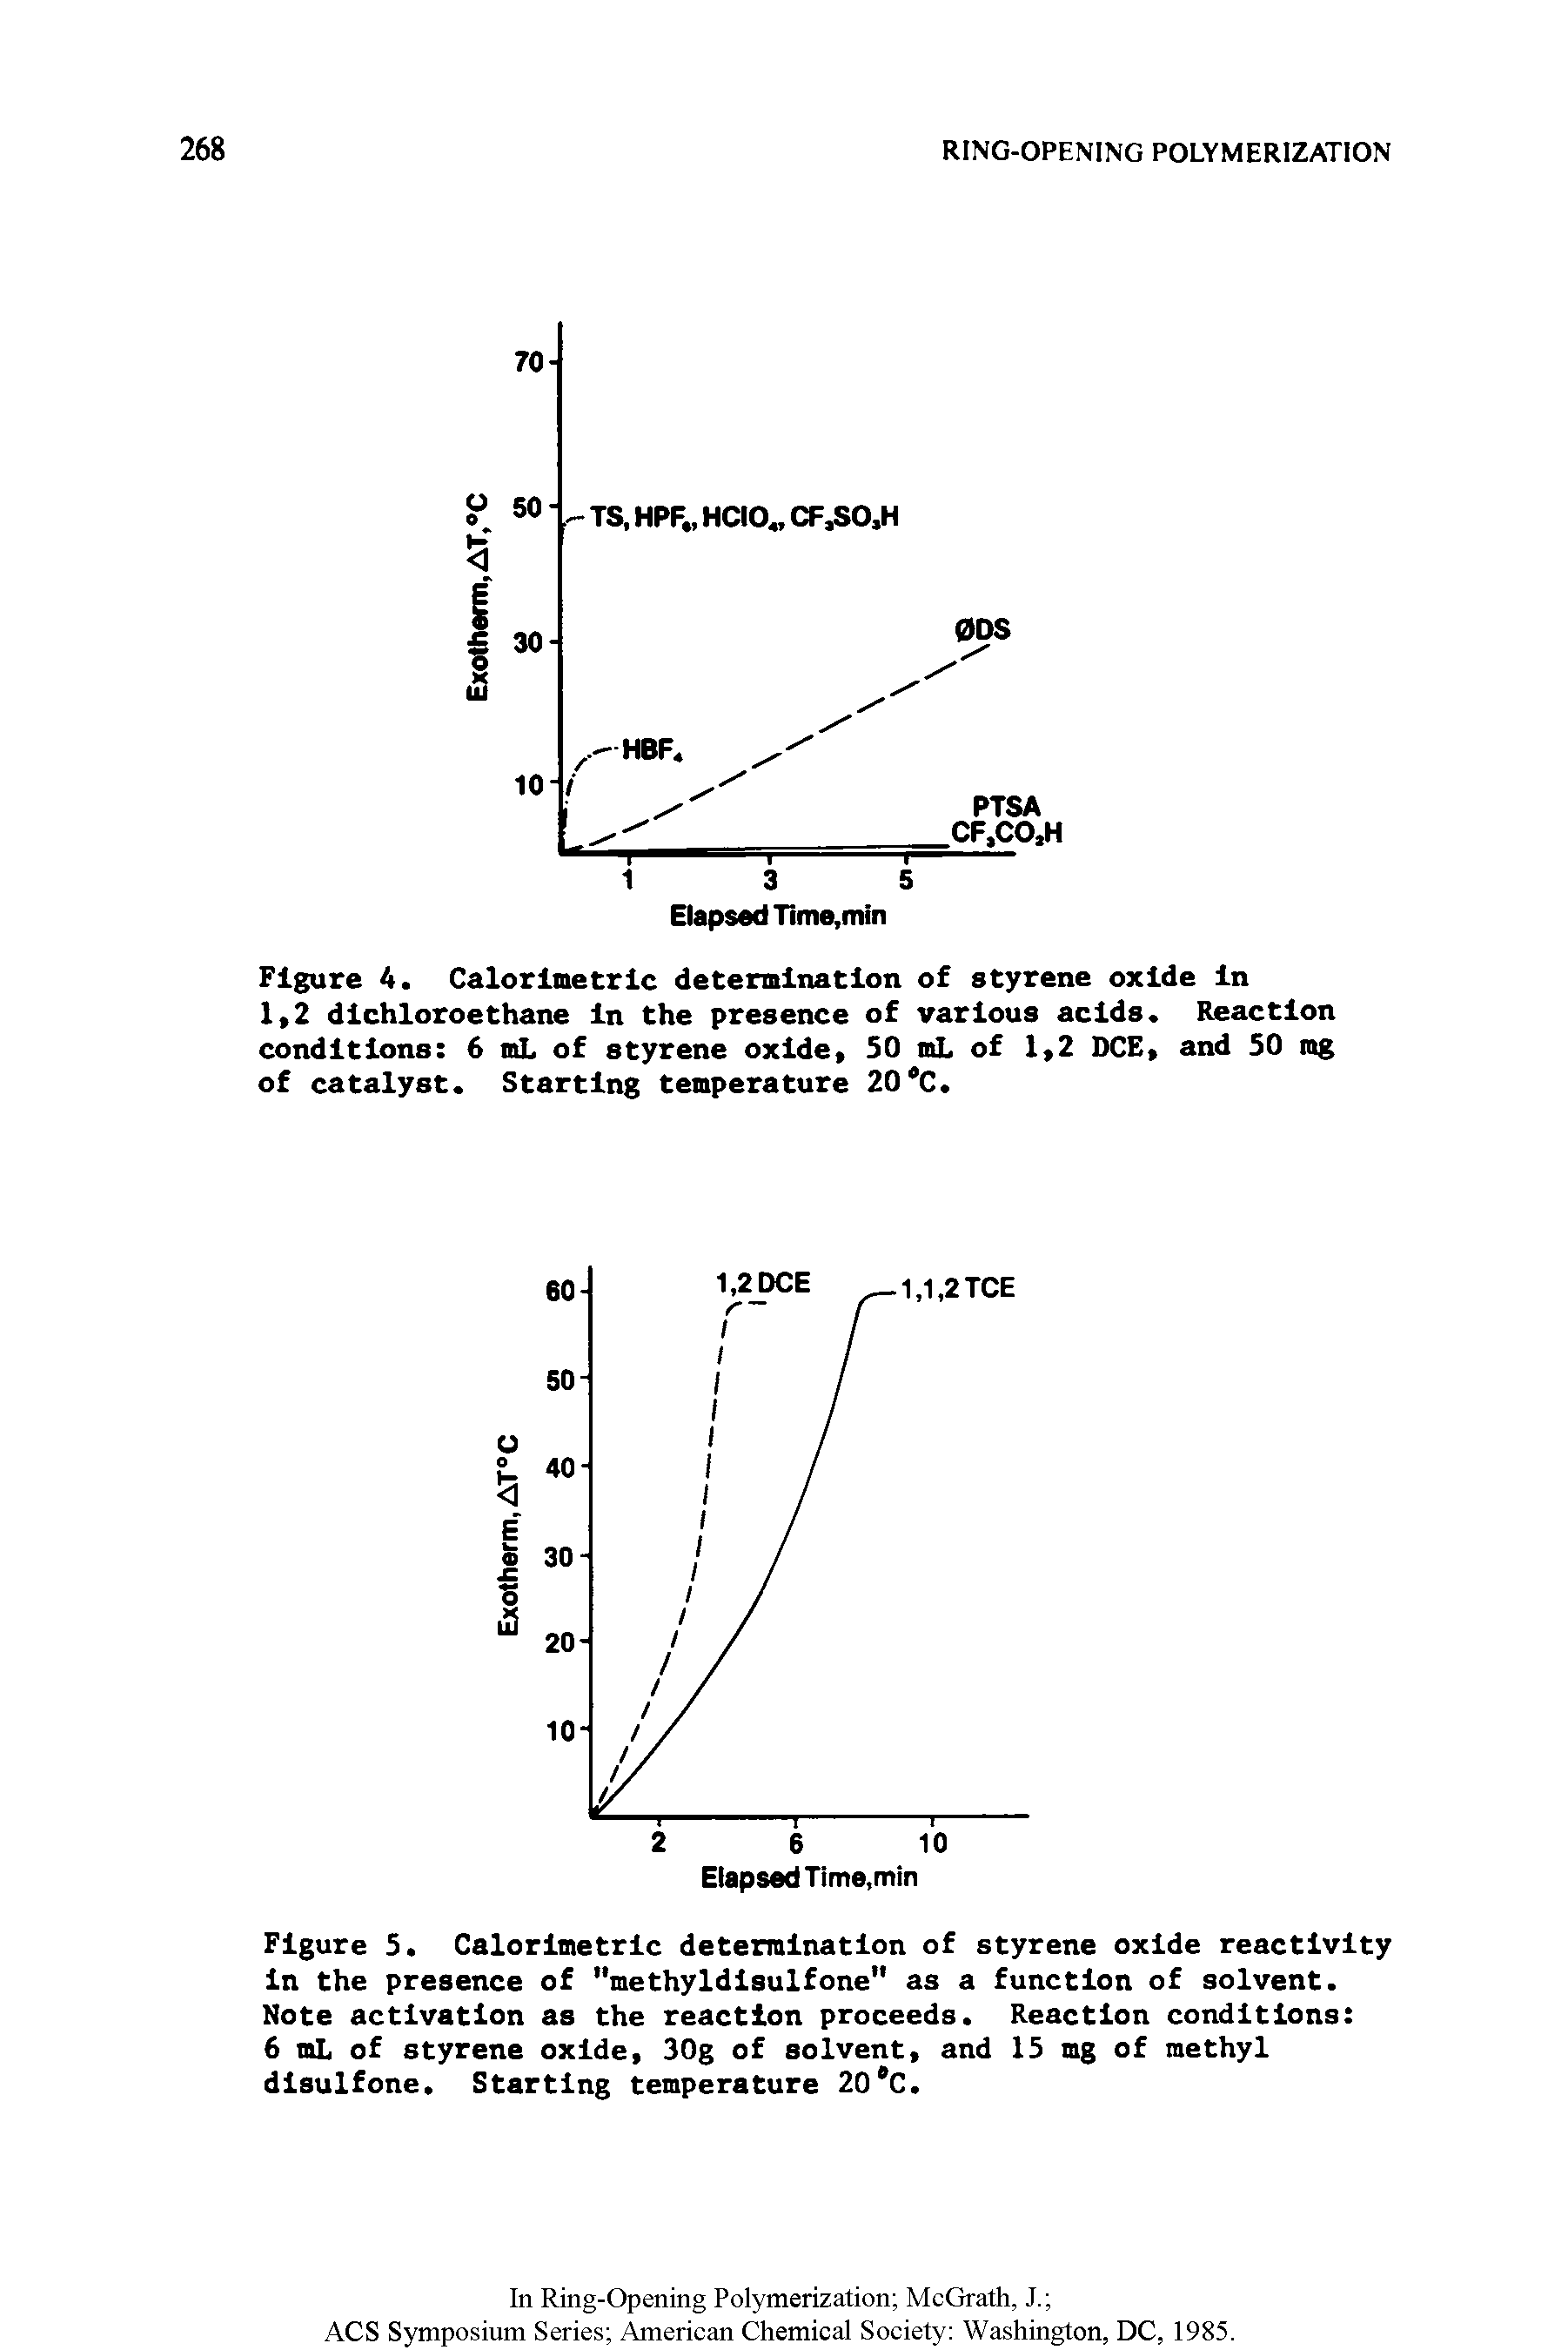 Figure 4. Calorimetric determination of styrene oxide In 1(2 dlchloroethane In the presence of various acids. Reaction conditions 6 ml of styrene oxide, 50 mL of 1,2 DCE, and 50 mg of catalyst. Starting temperature 20 C.